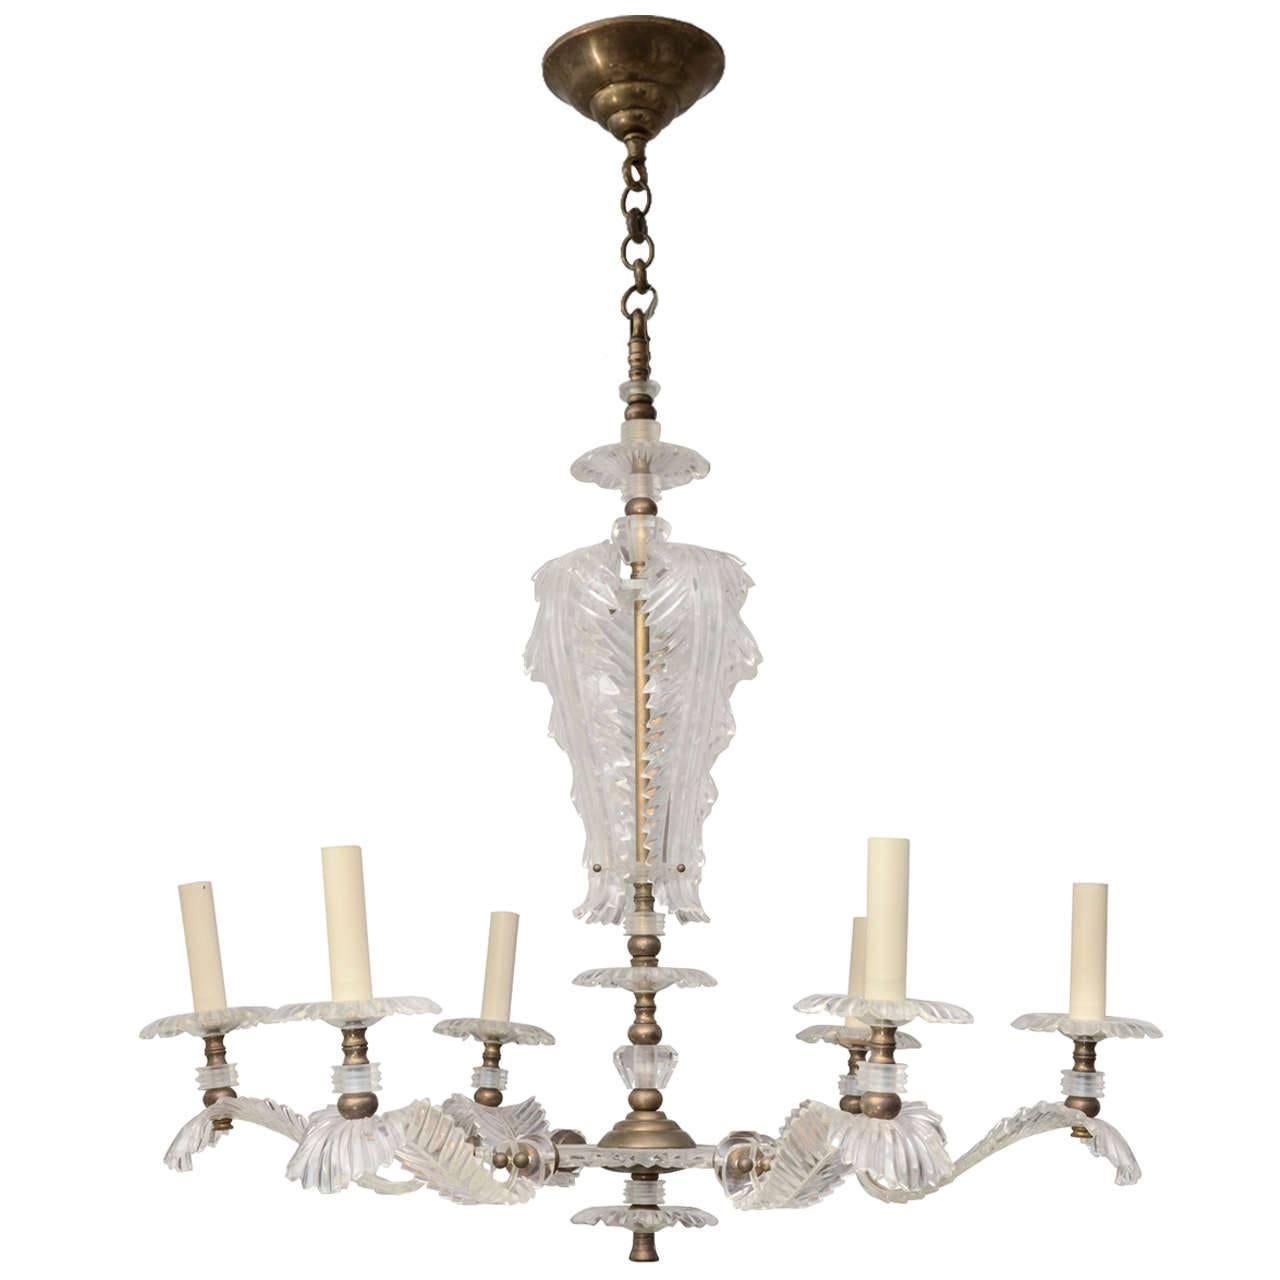 Six Arm Lucite Feather Chandelier